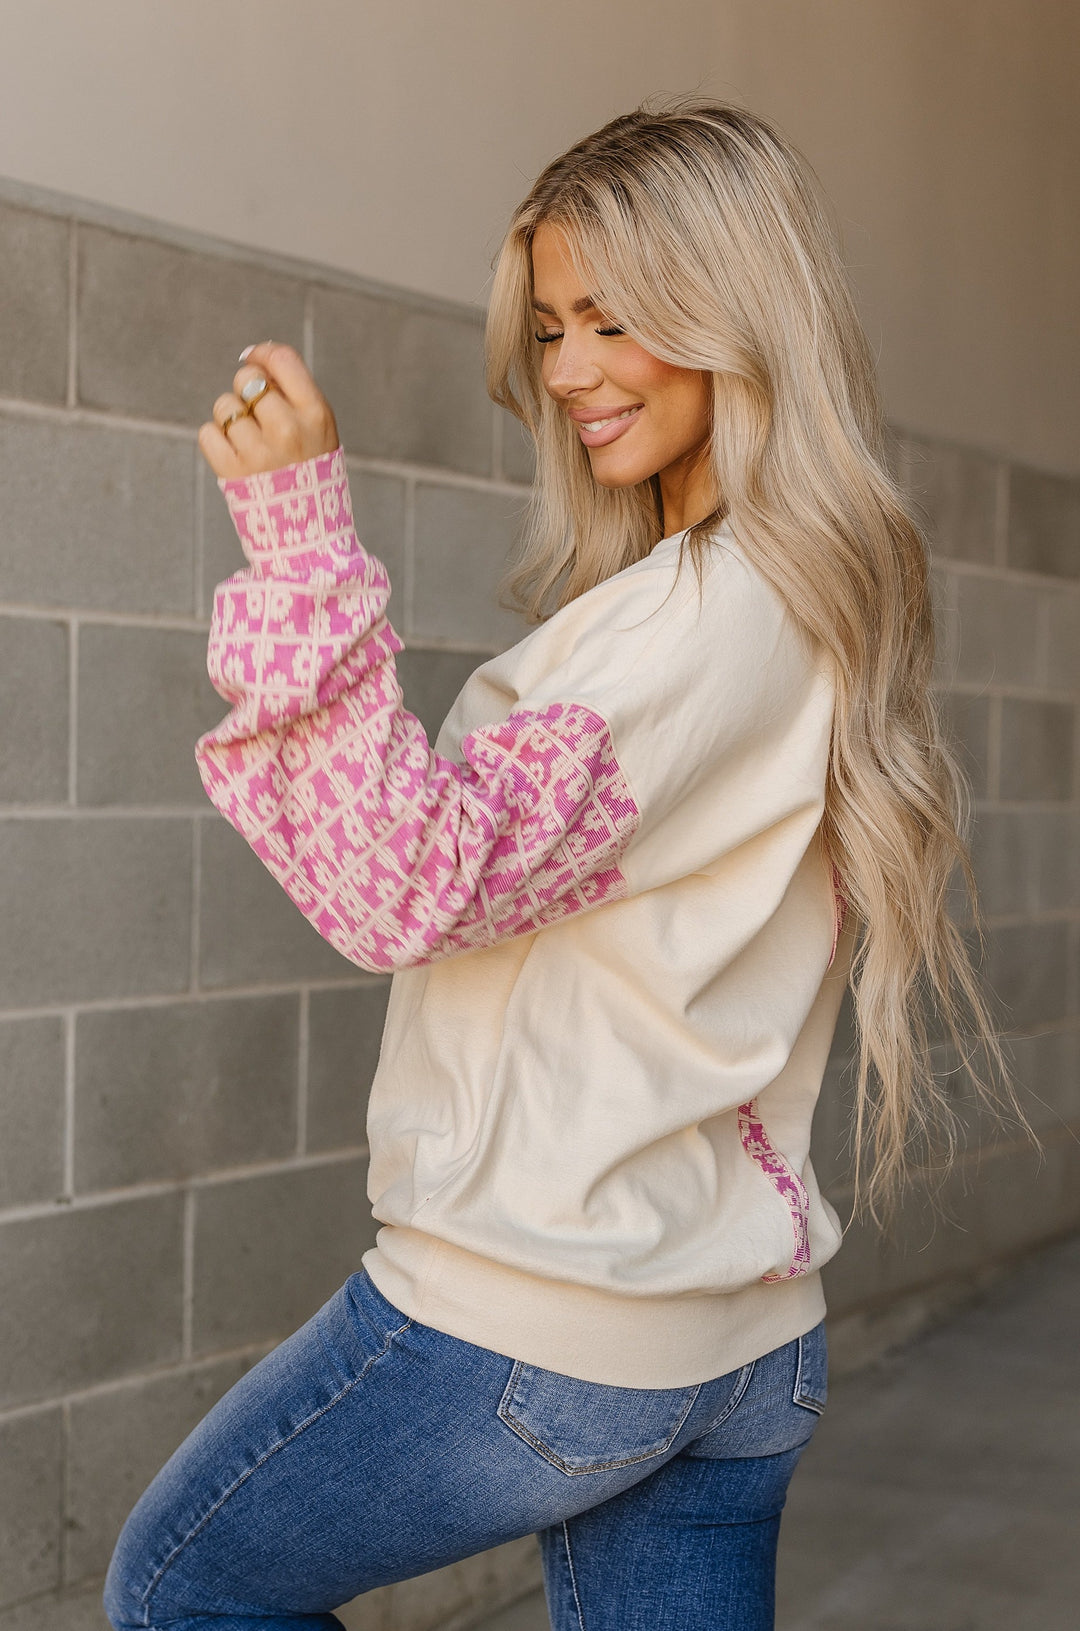 University Pullover - This Is Love - Mindy Mae's Marketcomfy cute hoodies